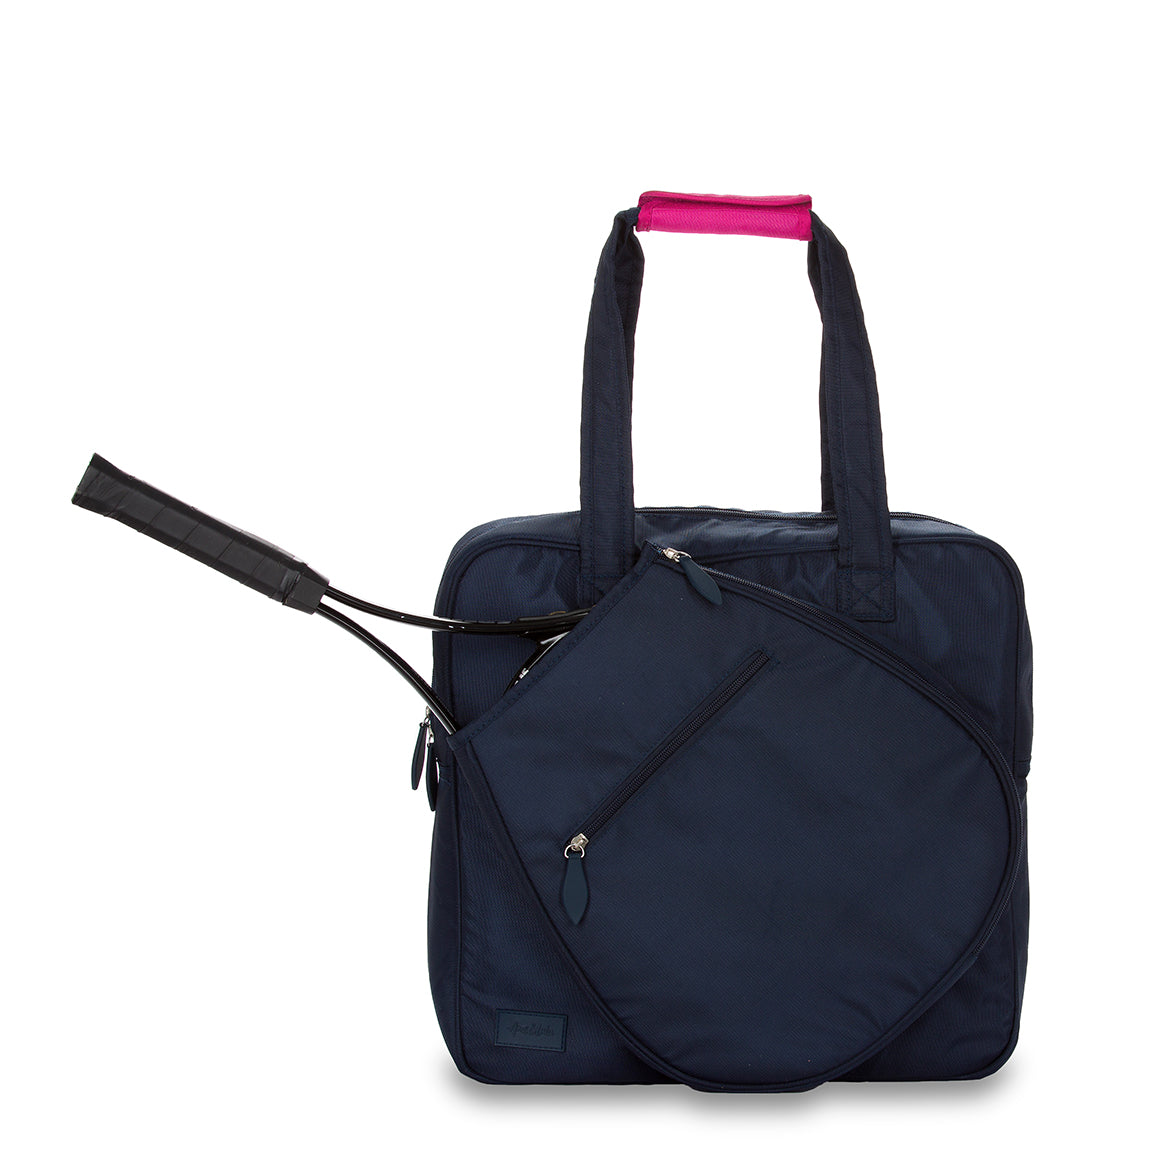 Front view of navy tennis tote with tennis racquet in the front pocket. Tote has hot pink handle cap